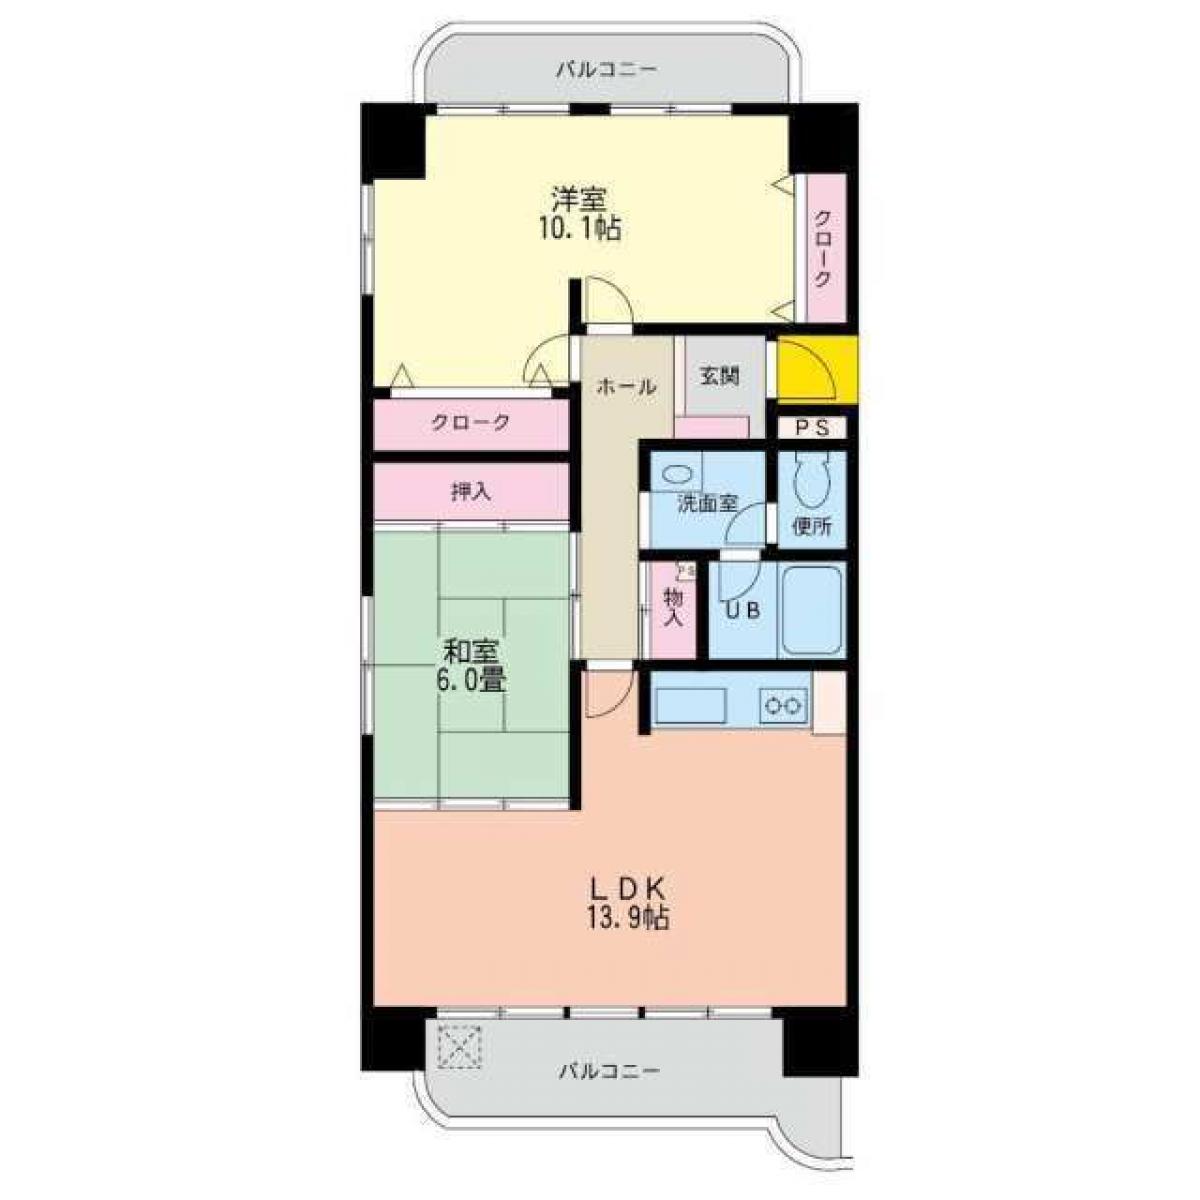 Picture of Apartment For Sale in Oita Shi, Oita, Japan